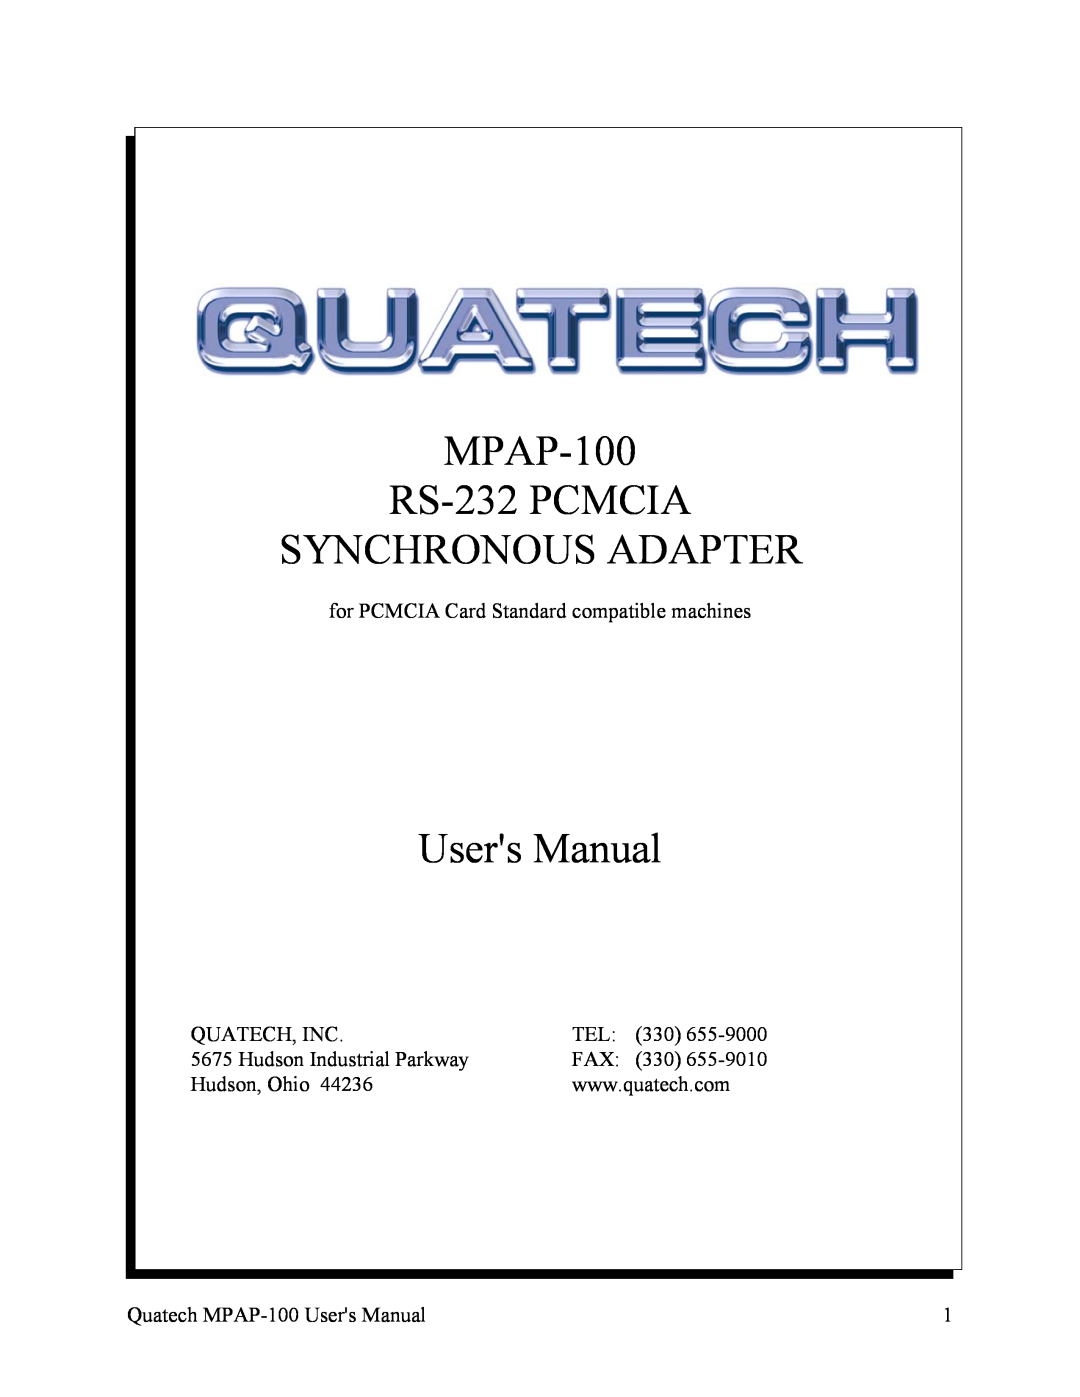 Quatech user manual MPAP-100 RS-232 PCMCIA SYNCHRONOUS ADAPTER, Users Manual, Quatech, Inc, Hudson Industrial Parkway 